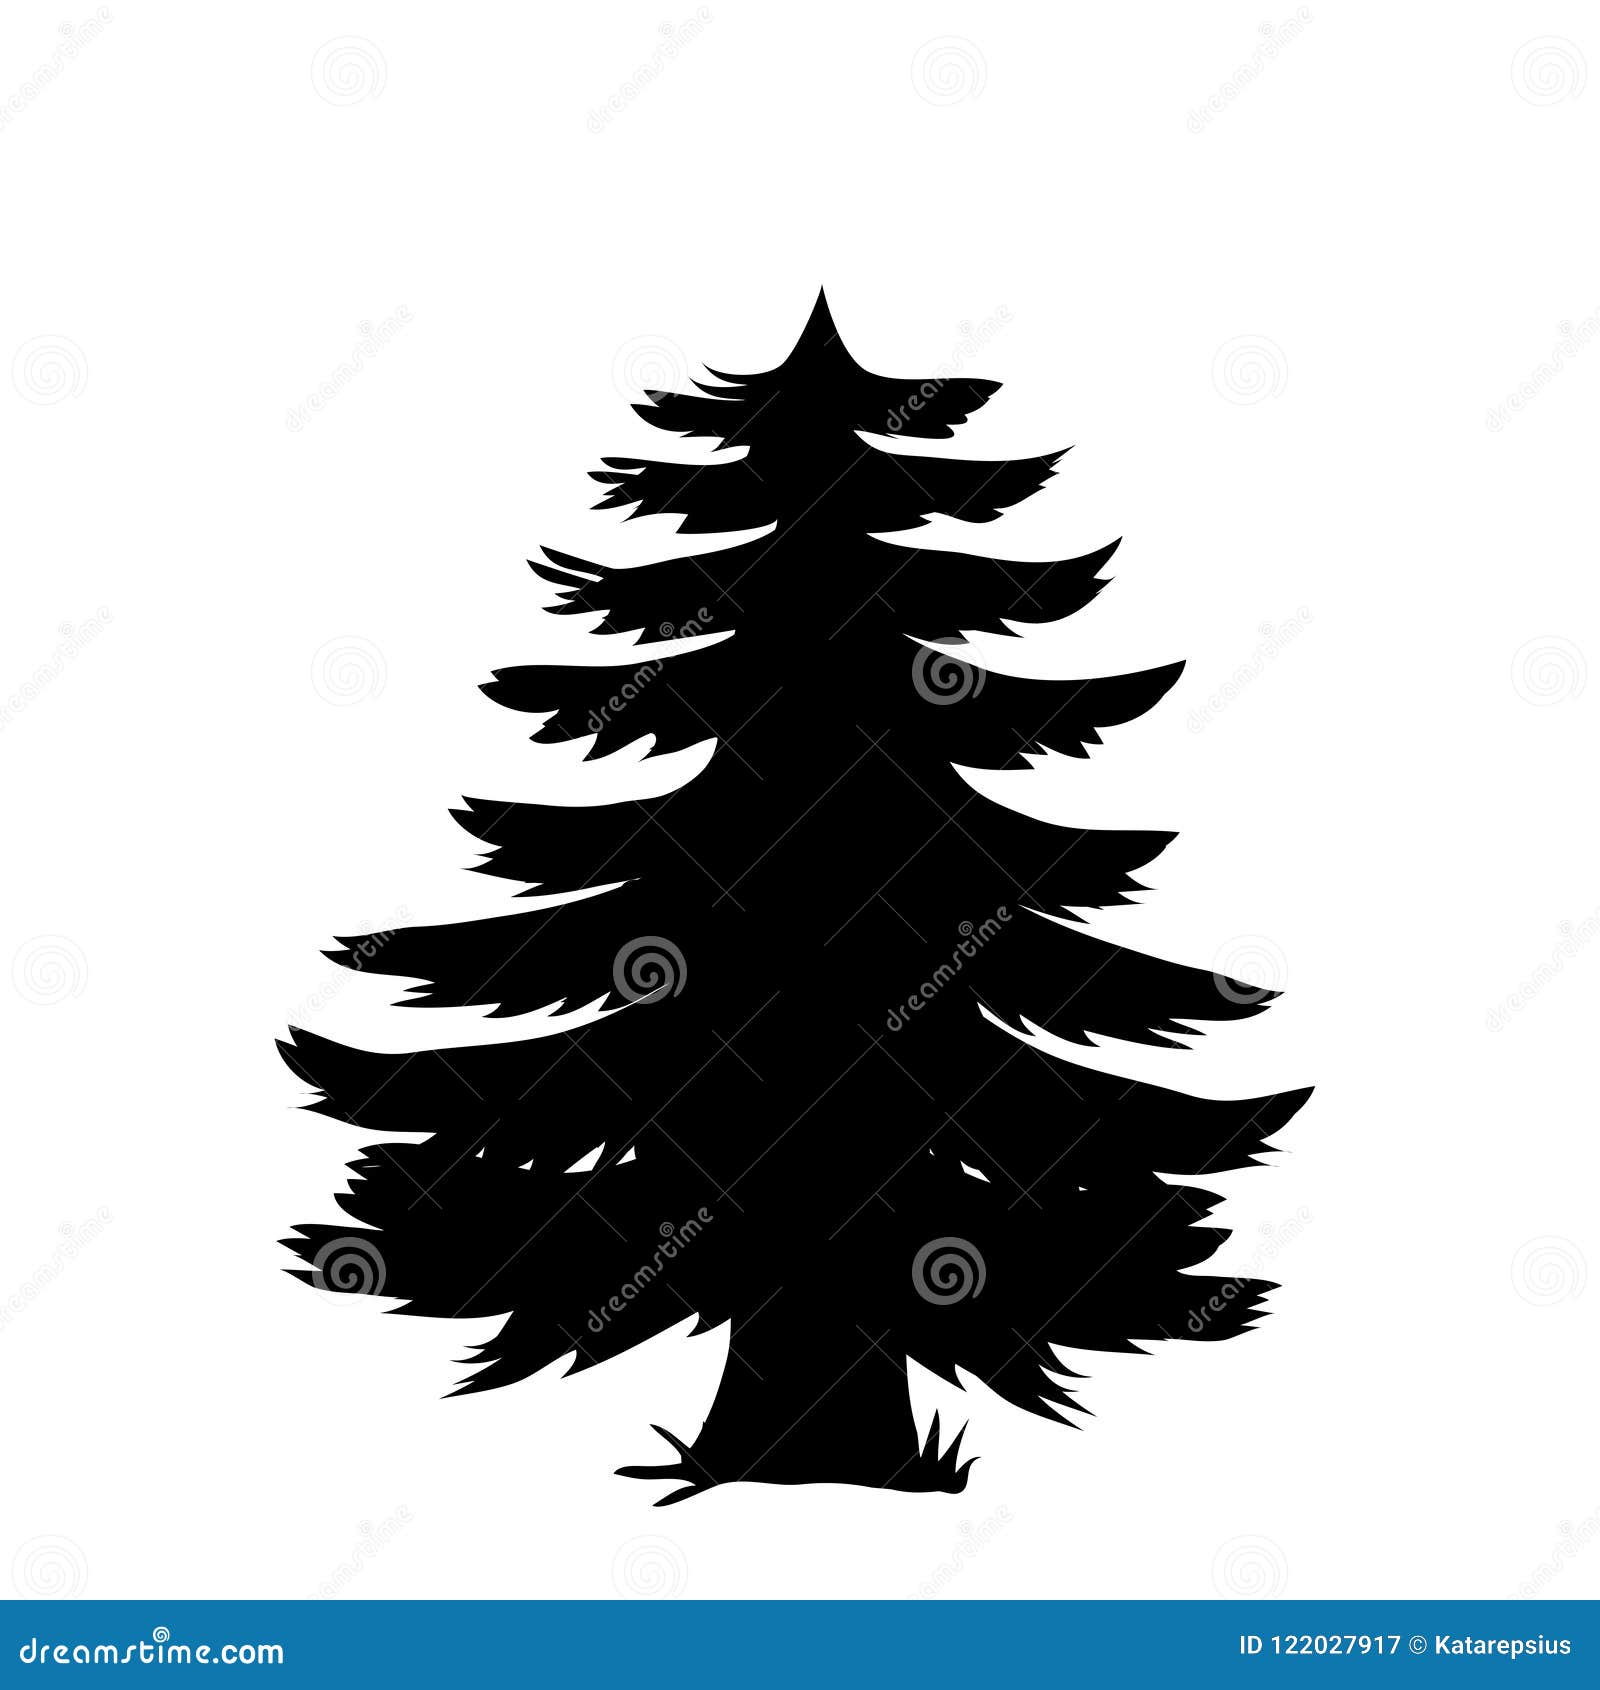 pine tree clipart black and white vector